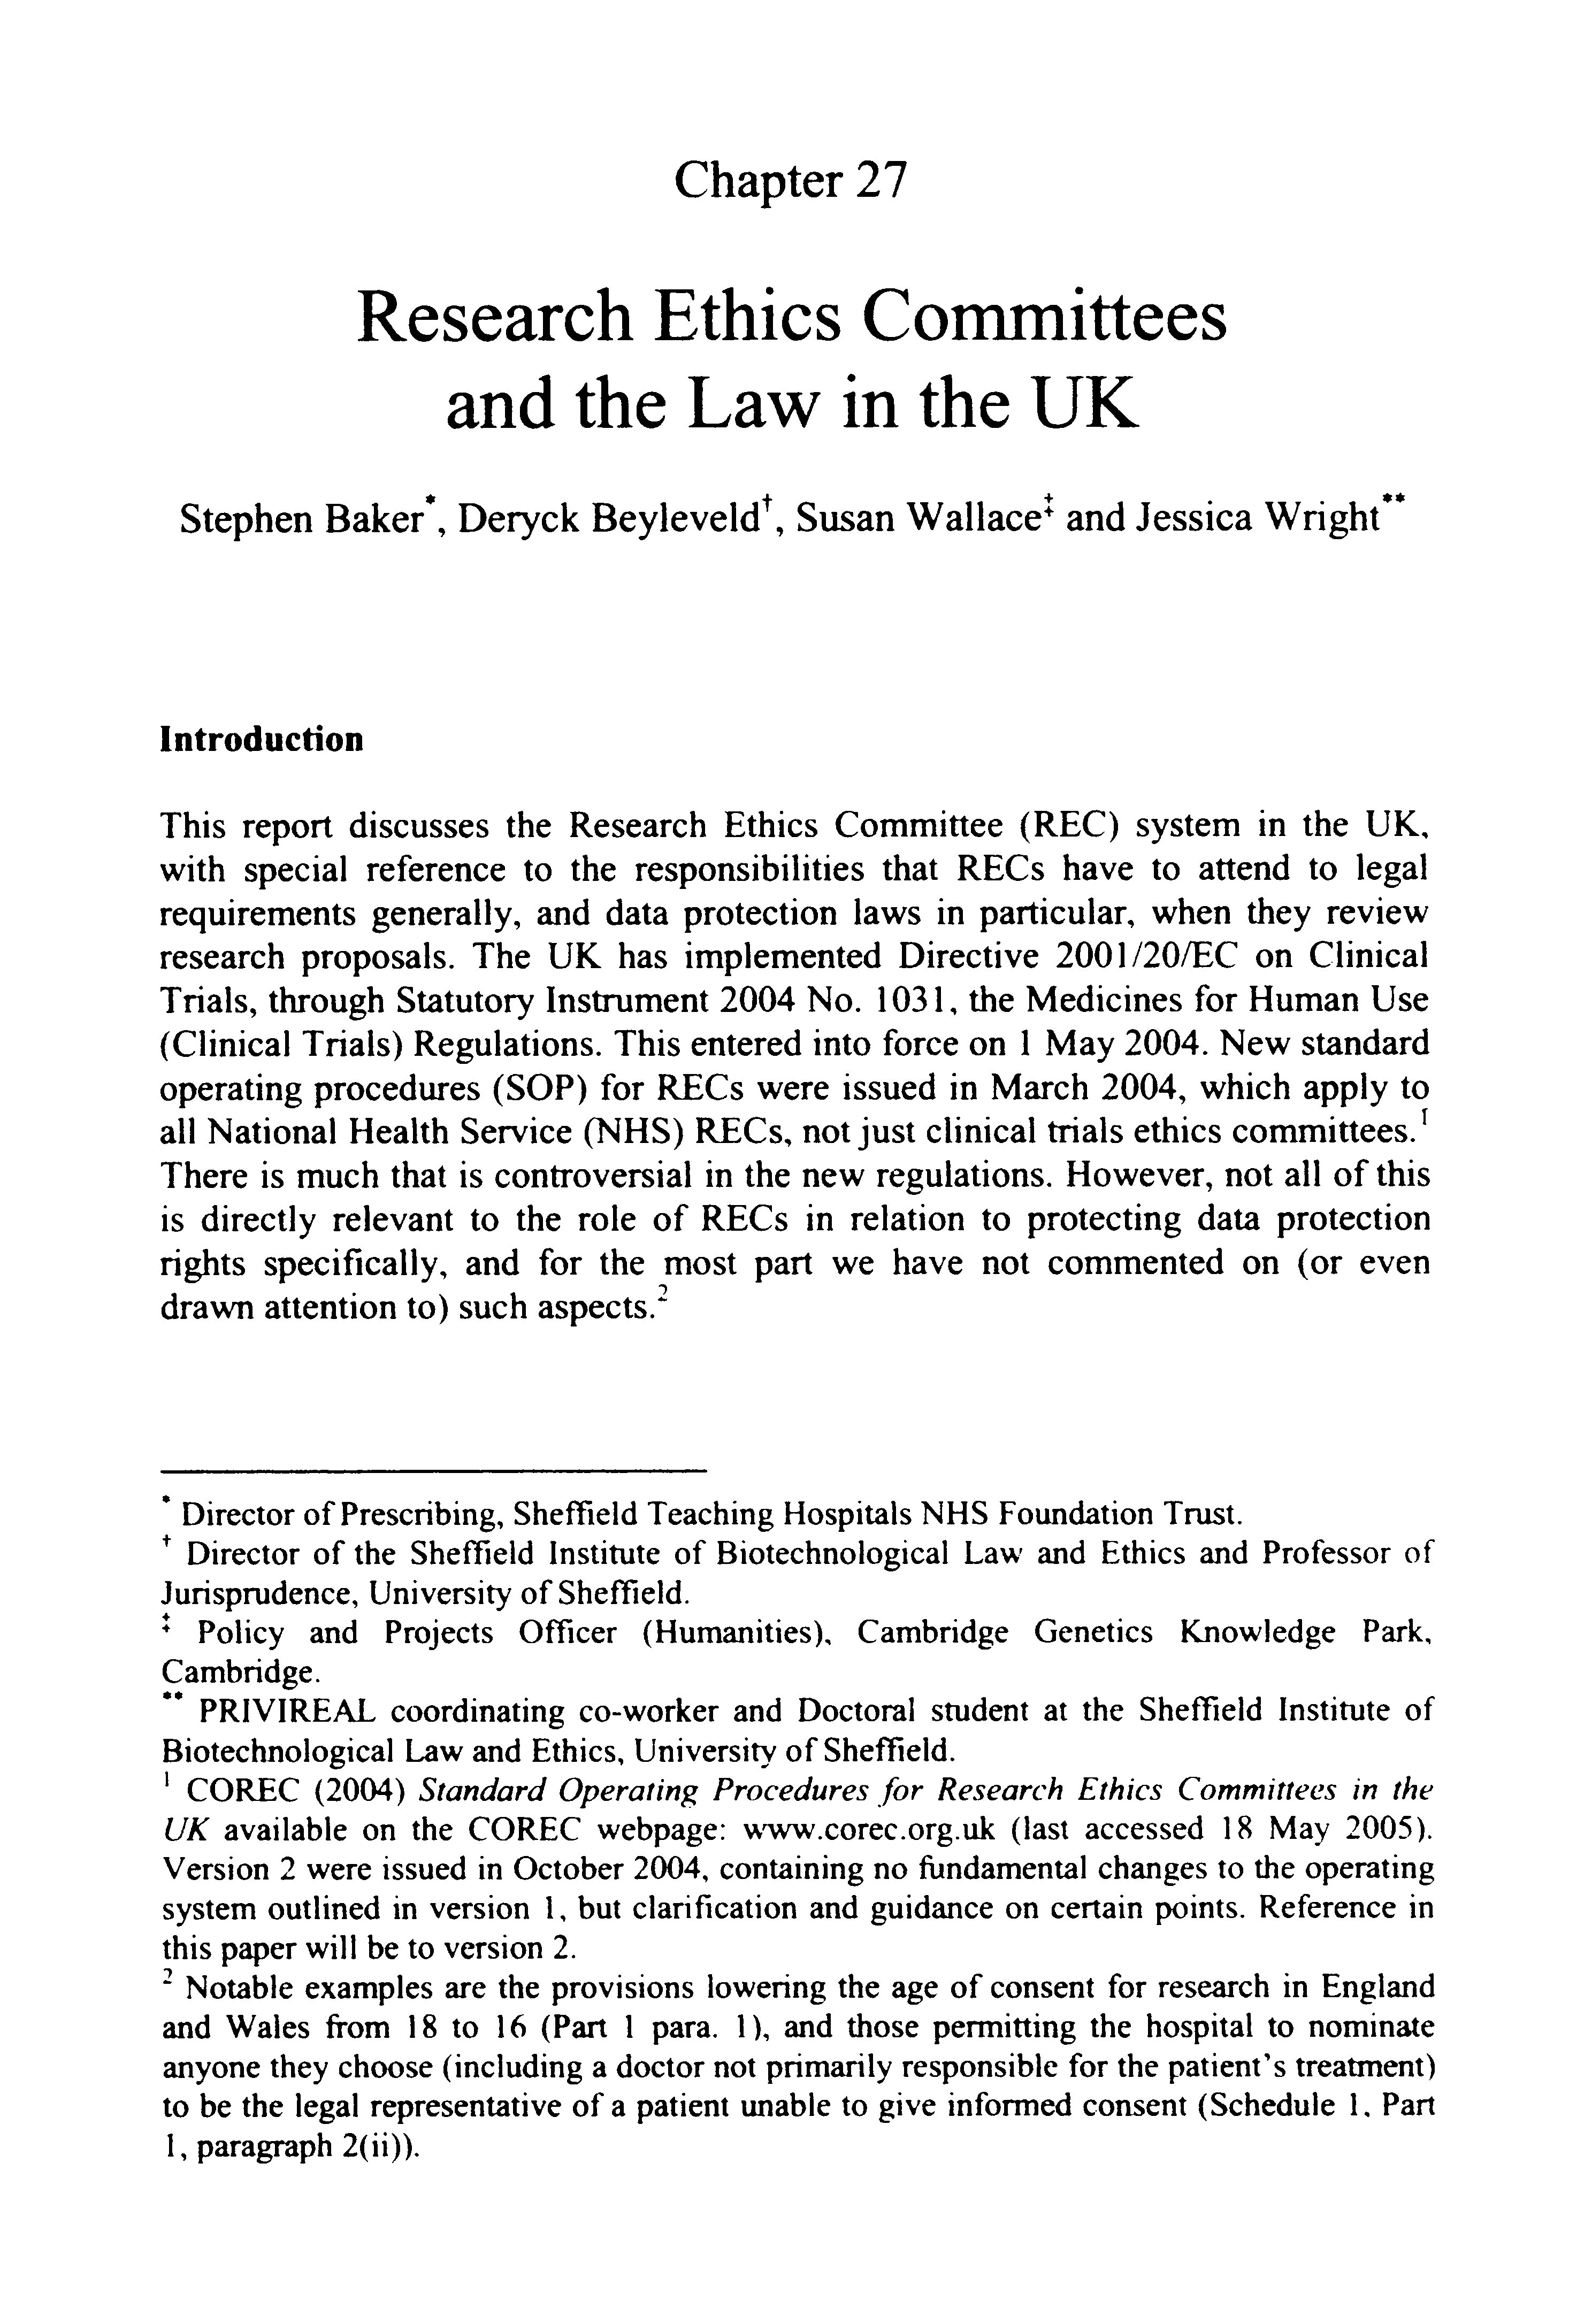 Research Ethics Committees and the Law in the UK Thumbnail